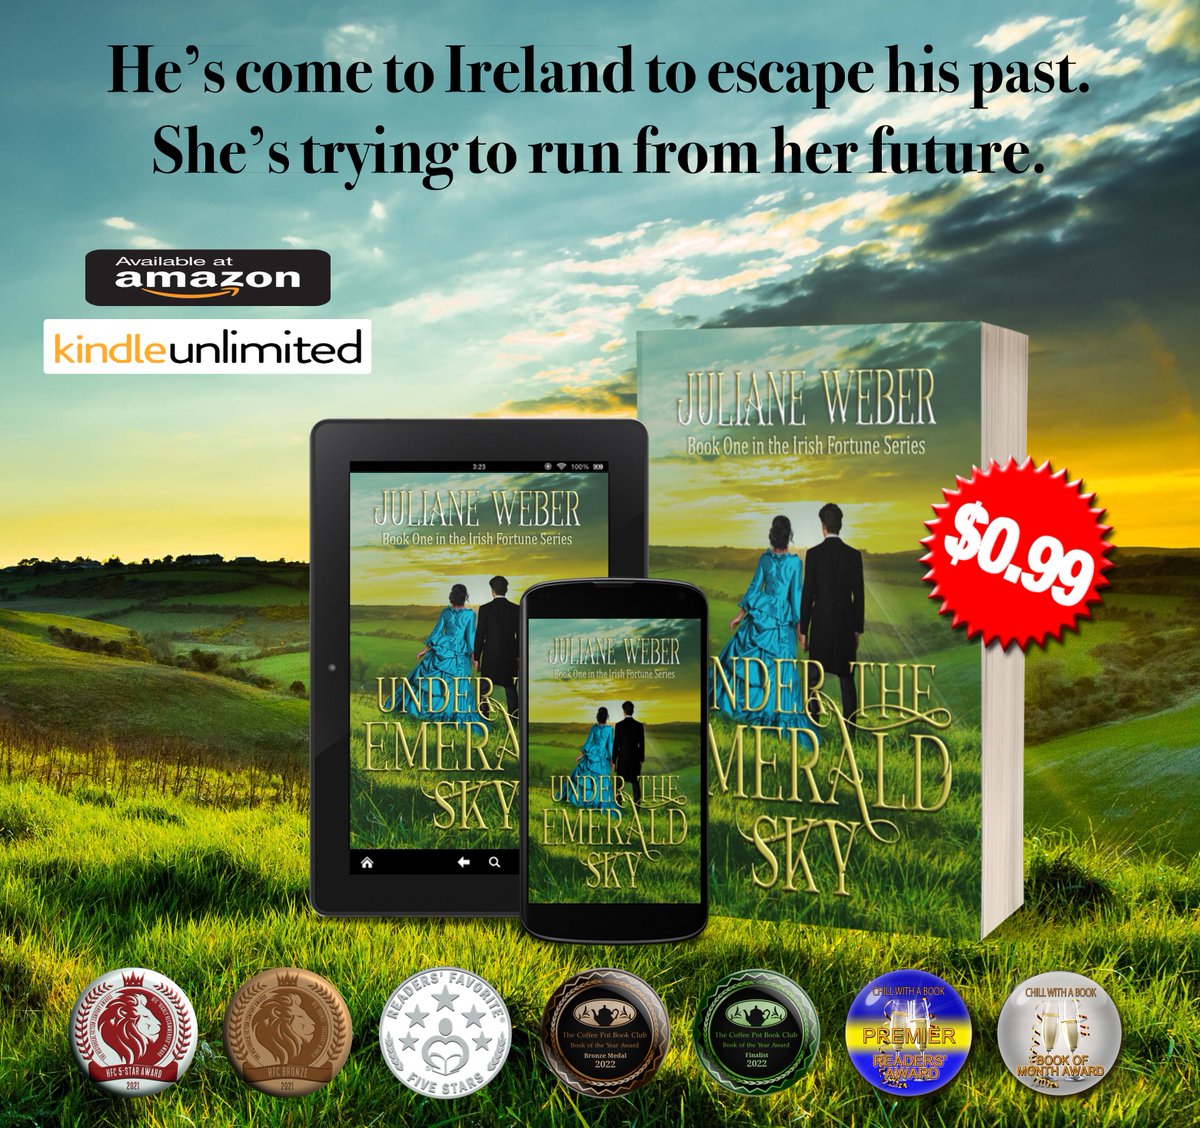 A sweeping love story in a troubled land…

lnk.bio/ZeRo

#99cents #KindleUnlimited #HistoricalRomance #IrishFamine #Series #histfic #HistoricalFiction #Ireland